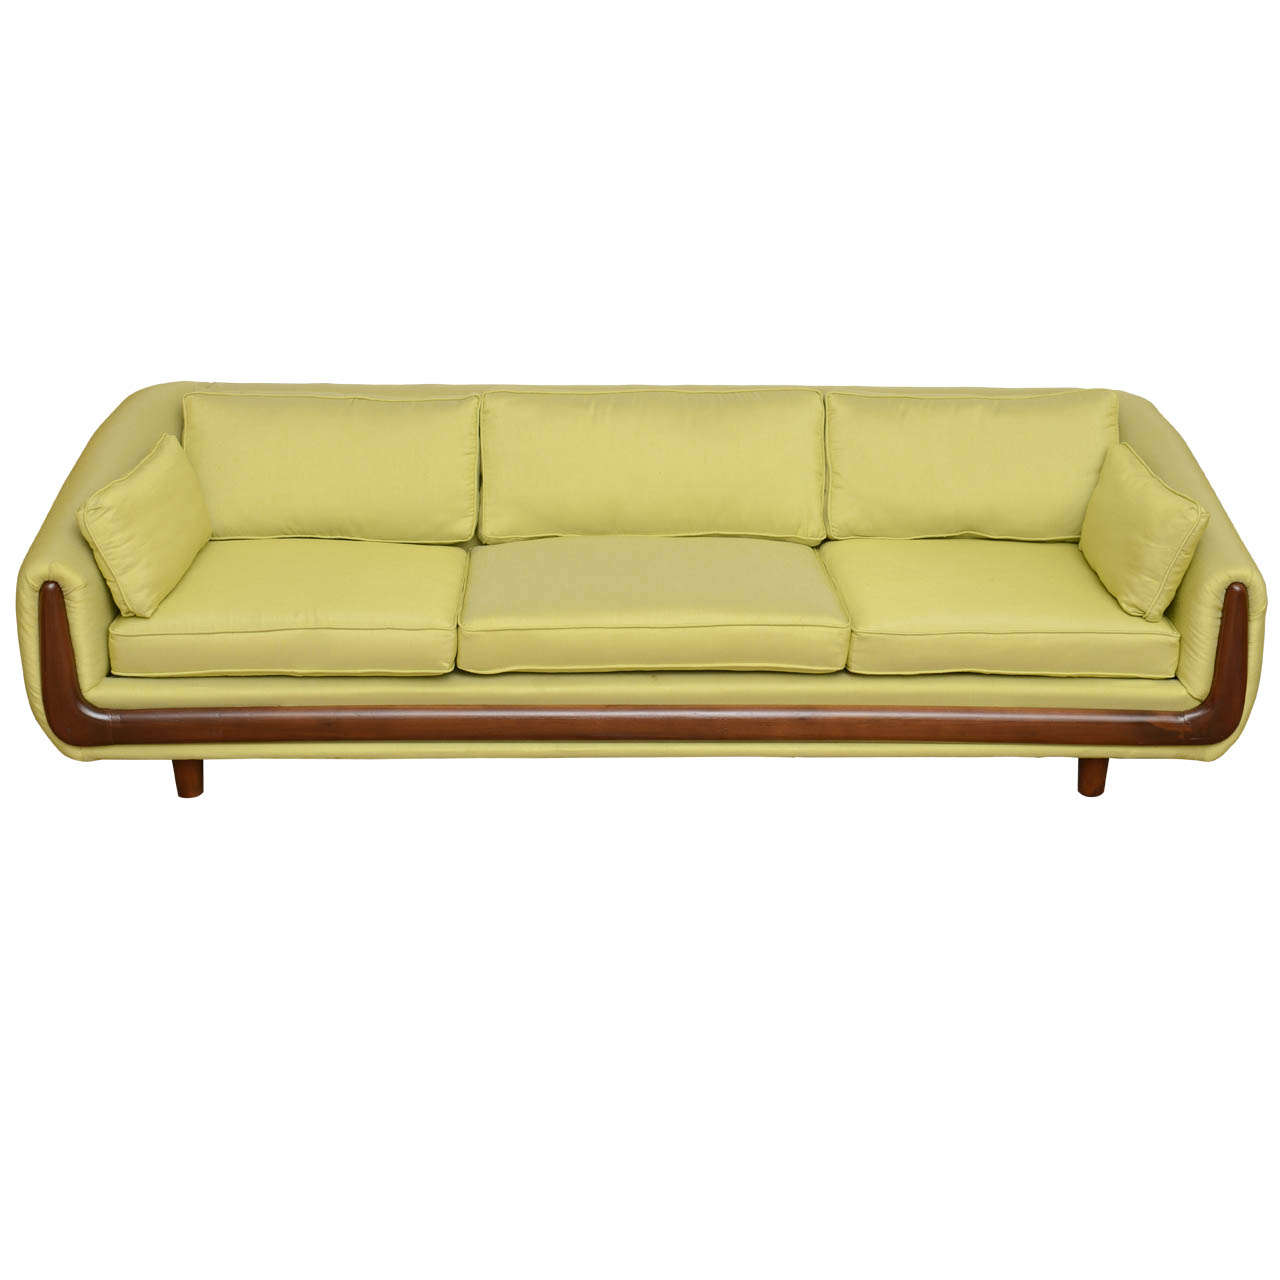 Adrian Pearsall Walnut Trim Couch 1960s